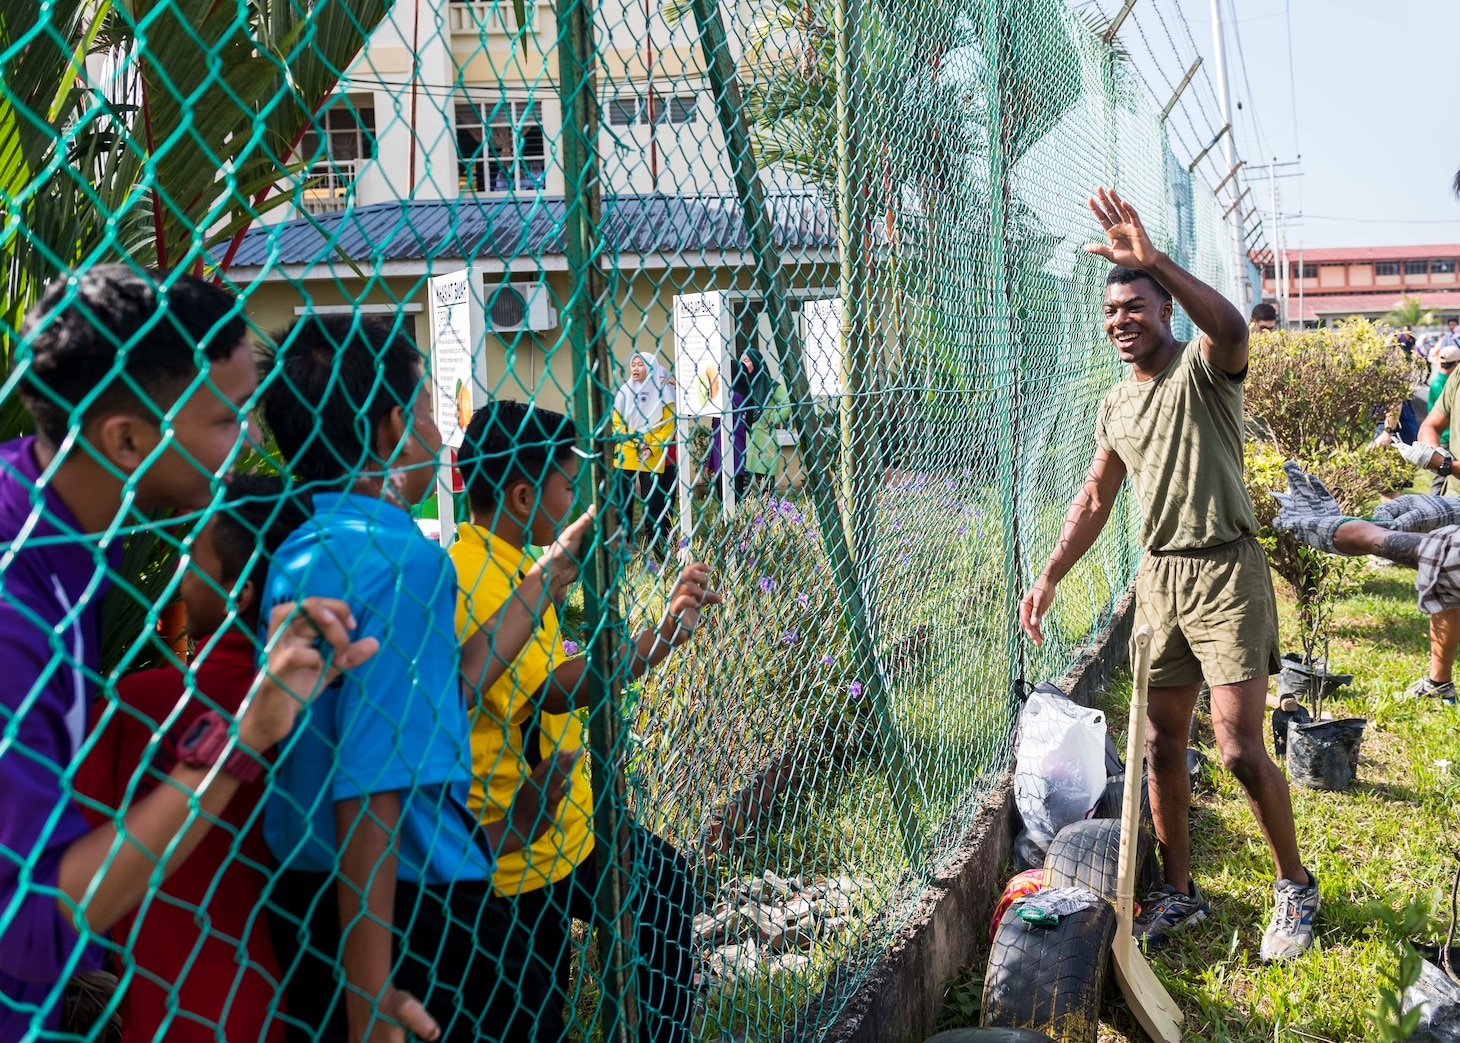 190225-N-WI365-1044 KOTA KINABALU, Malaysia (Feb. 25, 2019) – Lance Cpl. Daniel Notice, from Florissant, Miss., with the 31st Marine Expeditionary Unit (MEU) greets students from the Sekolah Menengah Kebangsaan Inanam High School during a cultural exchange and community service event.